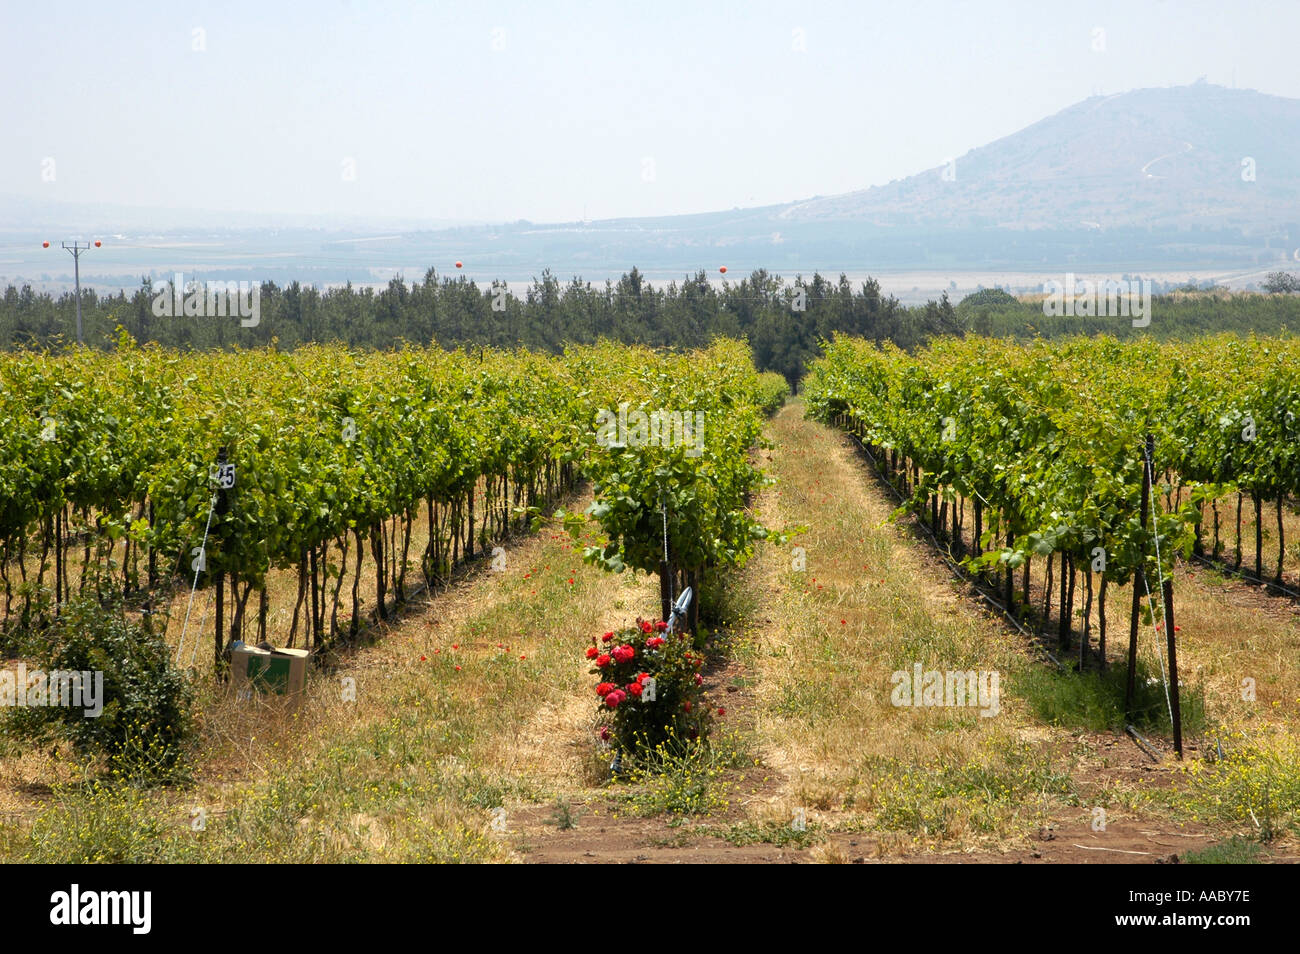 vineyards-at-the-golan-heights-israel-AABY7E.jpg